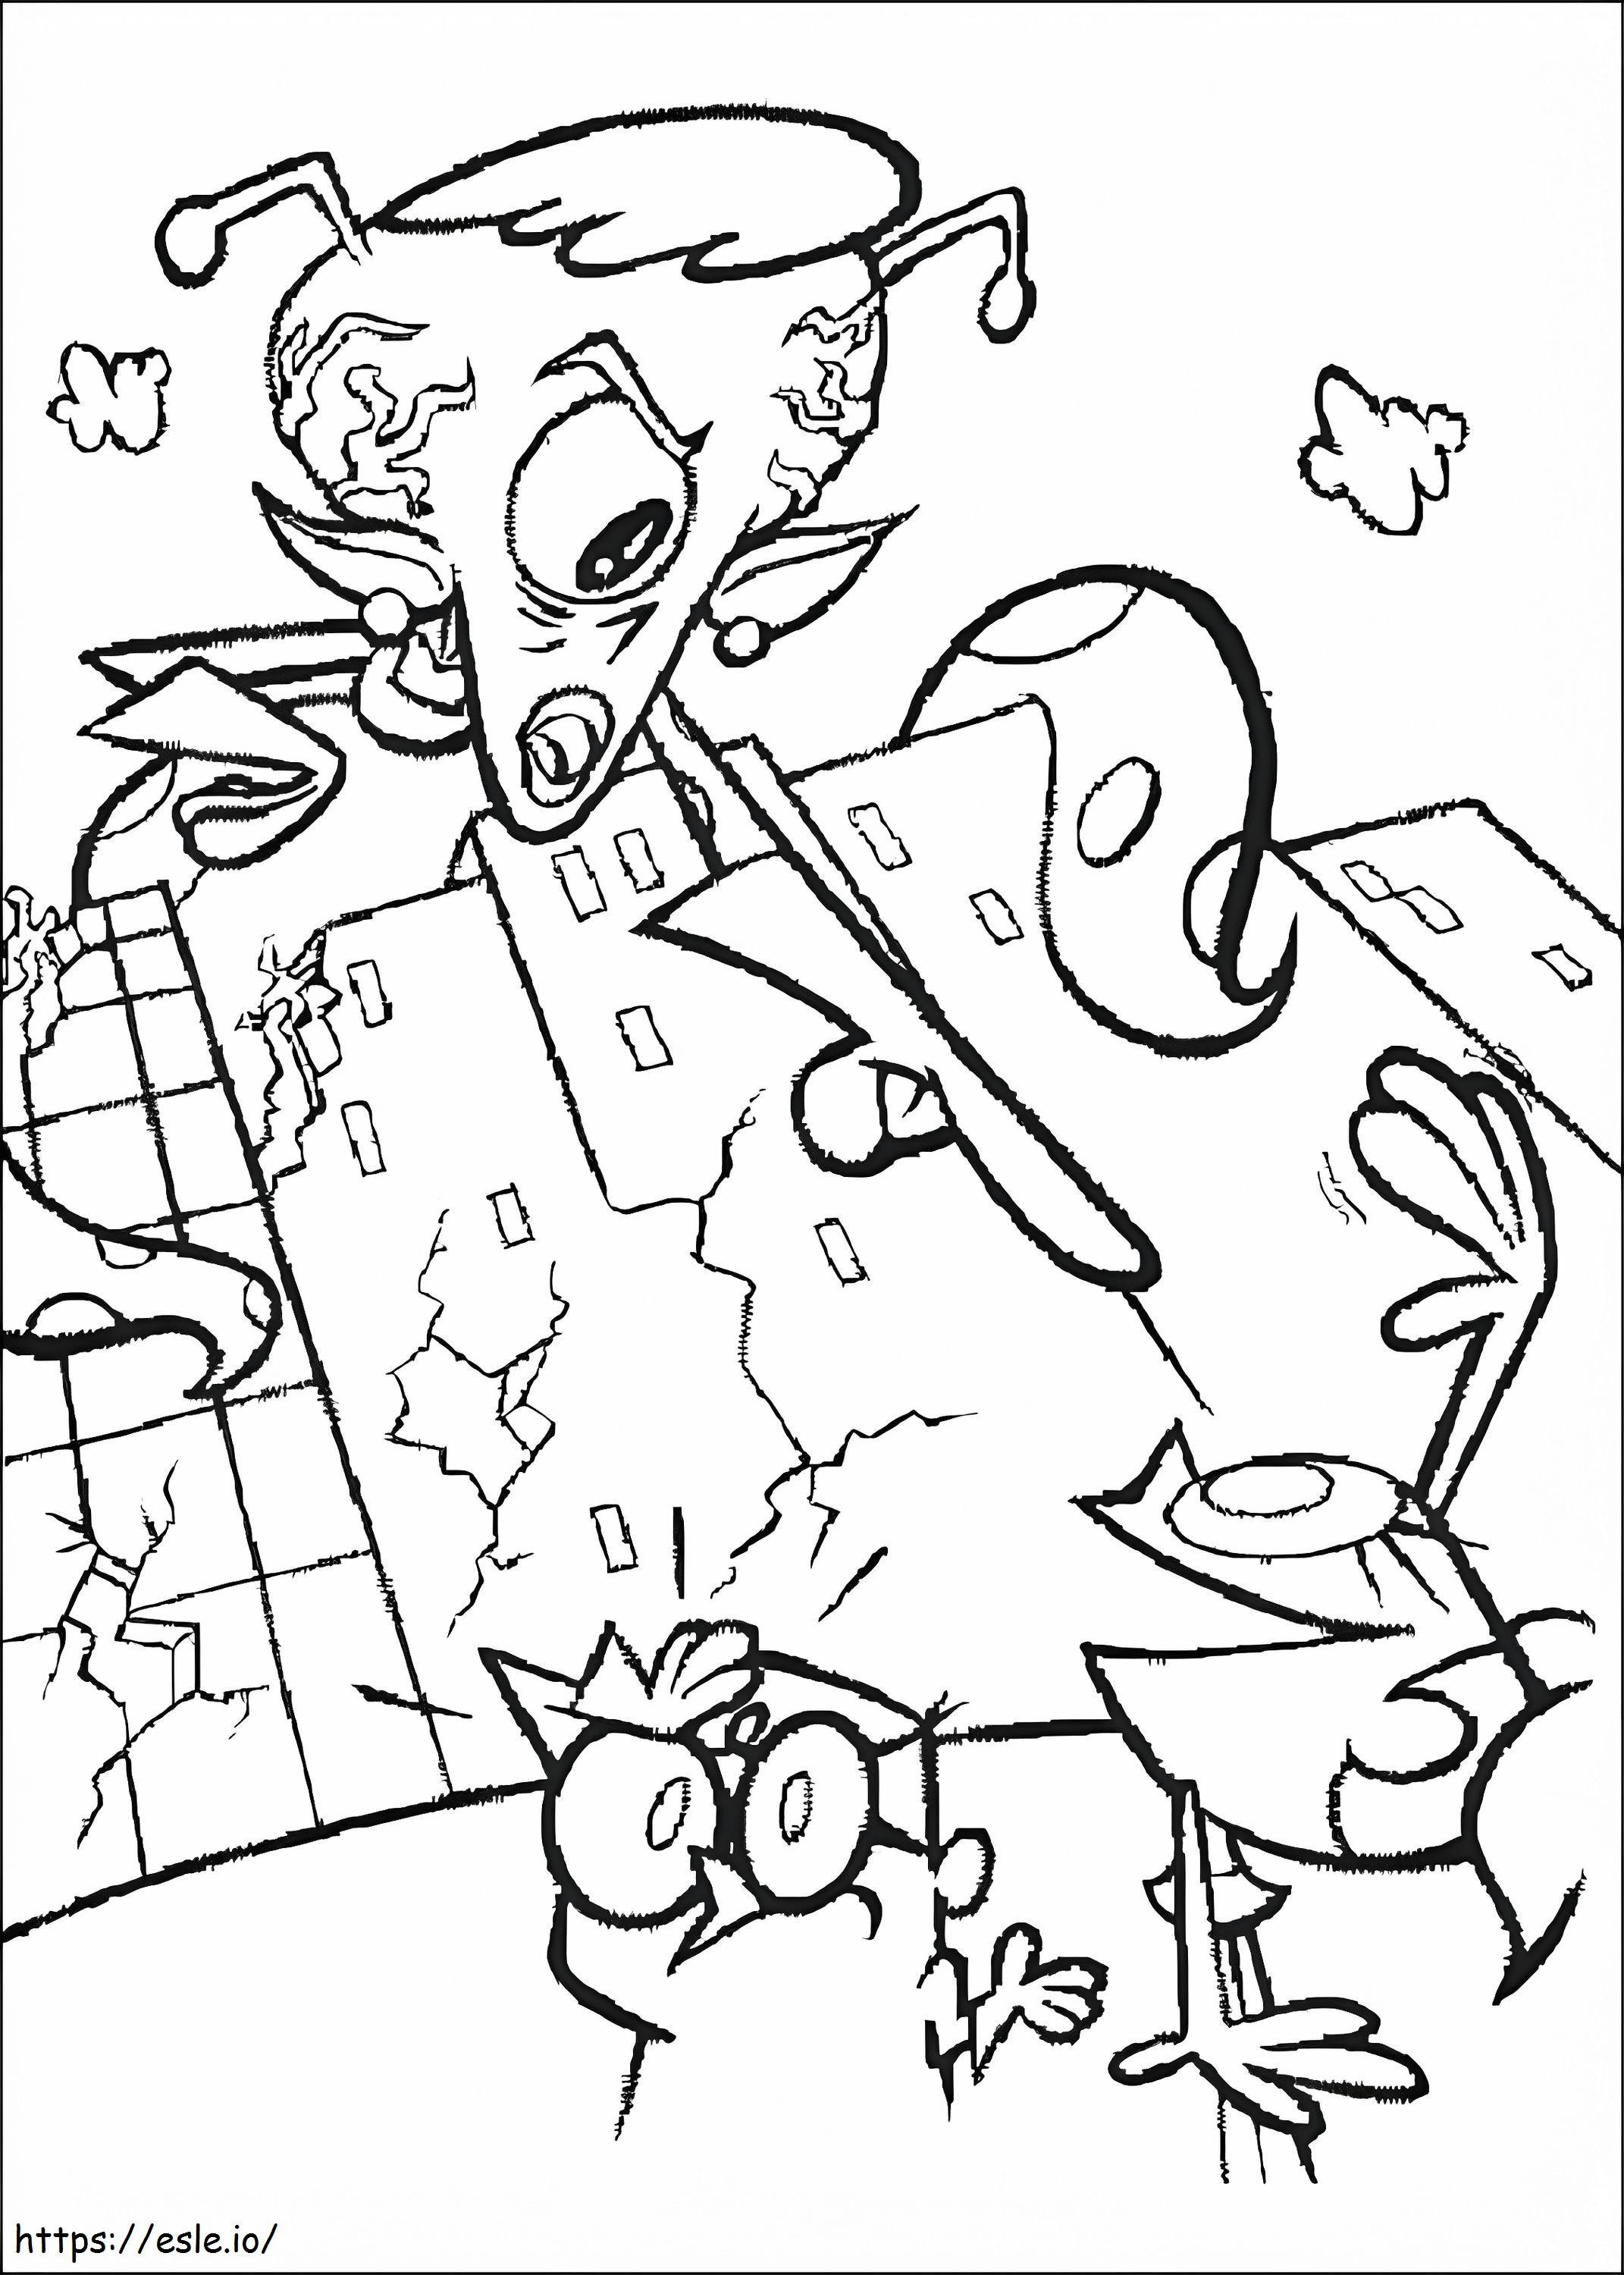 Printable Dexters Laboratory coloring page